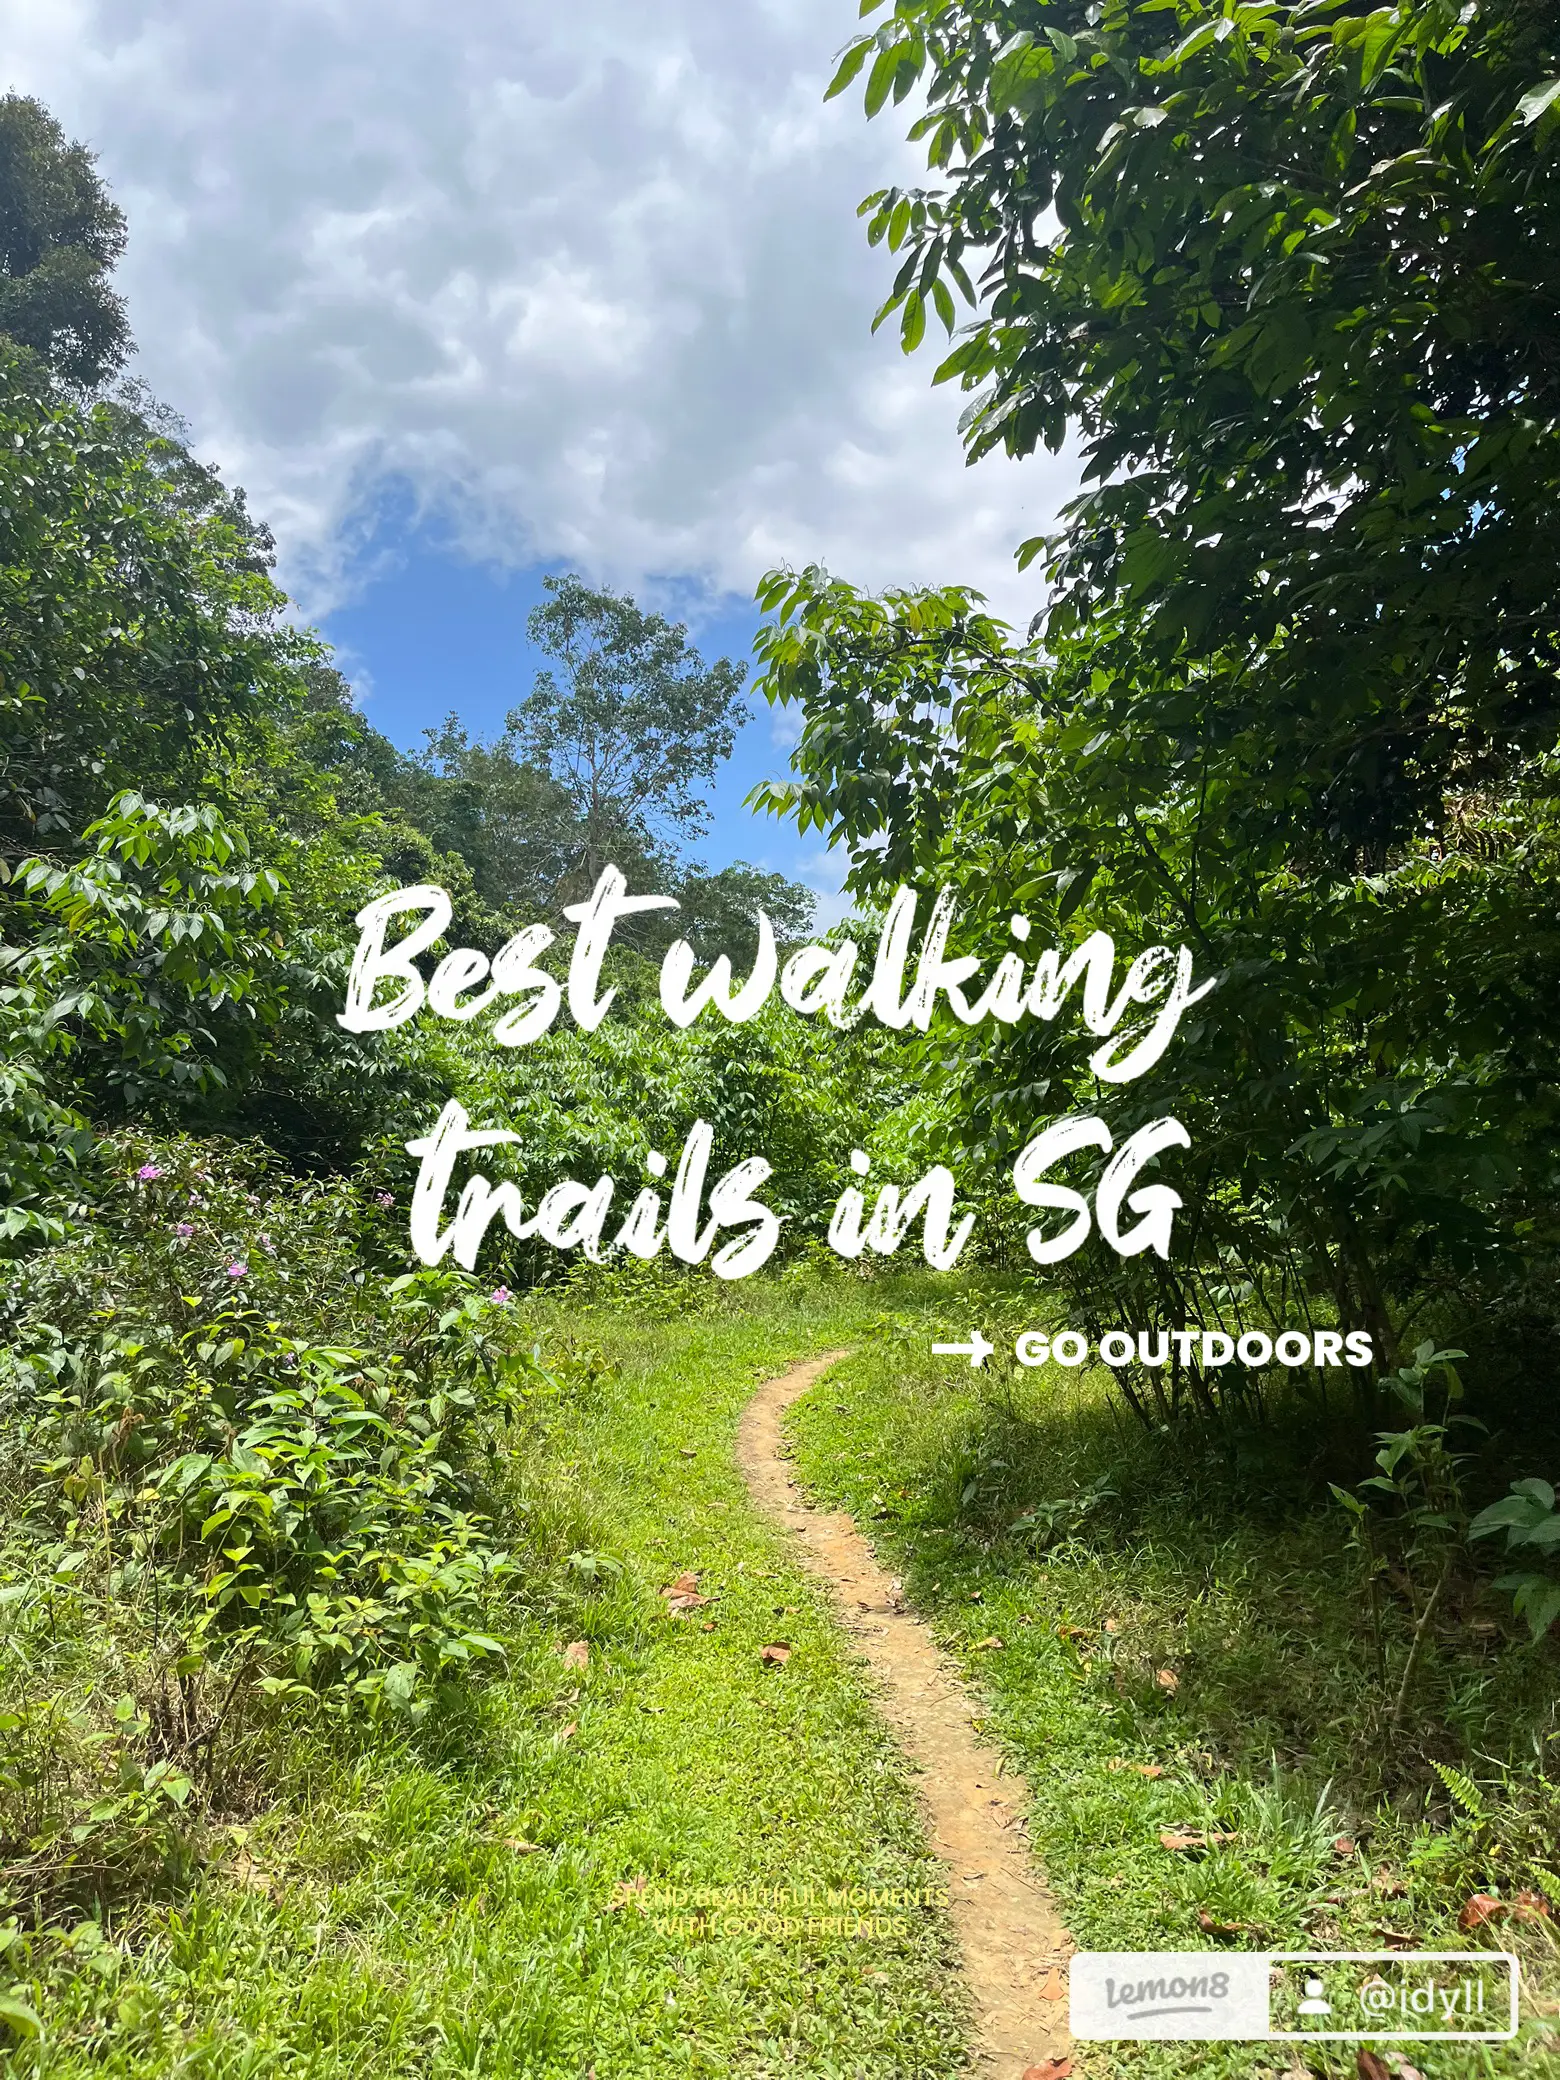 best walking trails in SG 😍🌴🌺's images(0)